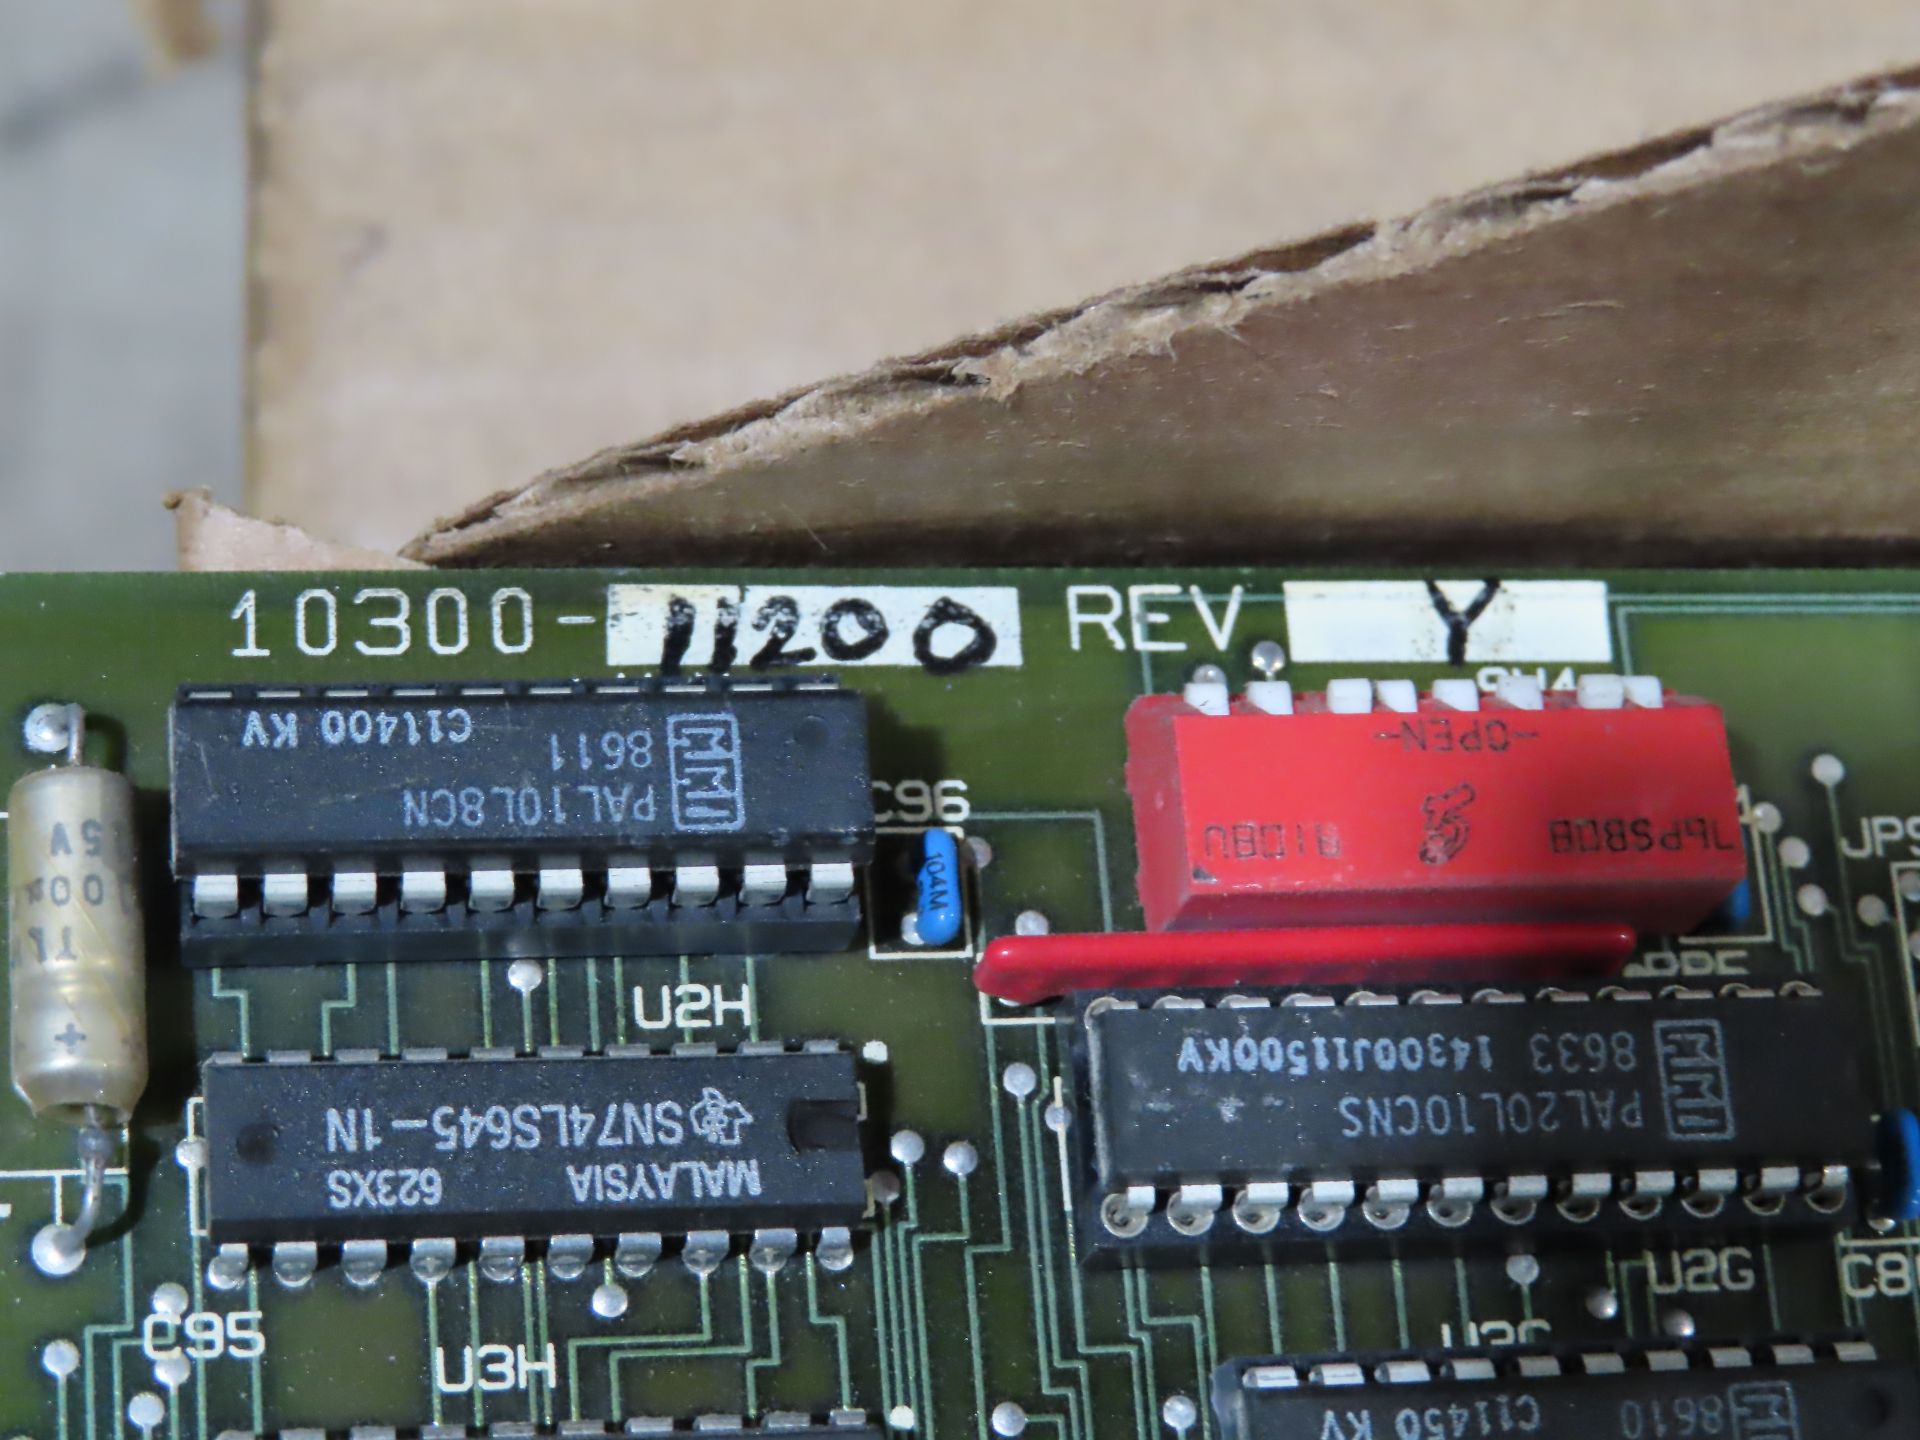 Adept part number 10300-11200 rev Y joint interface board, as always, with Brolyn LLC auctions, - Image 2 of 2